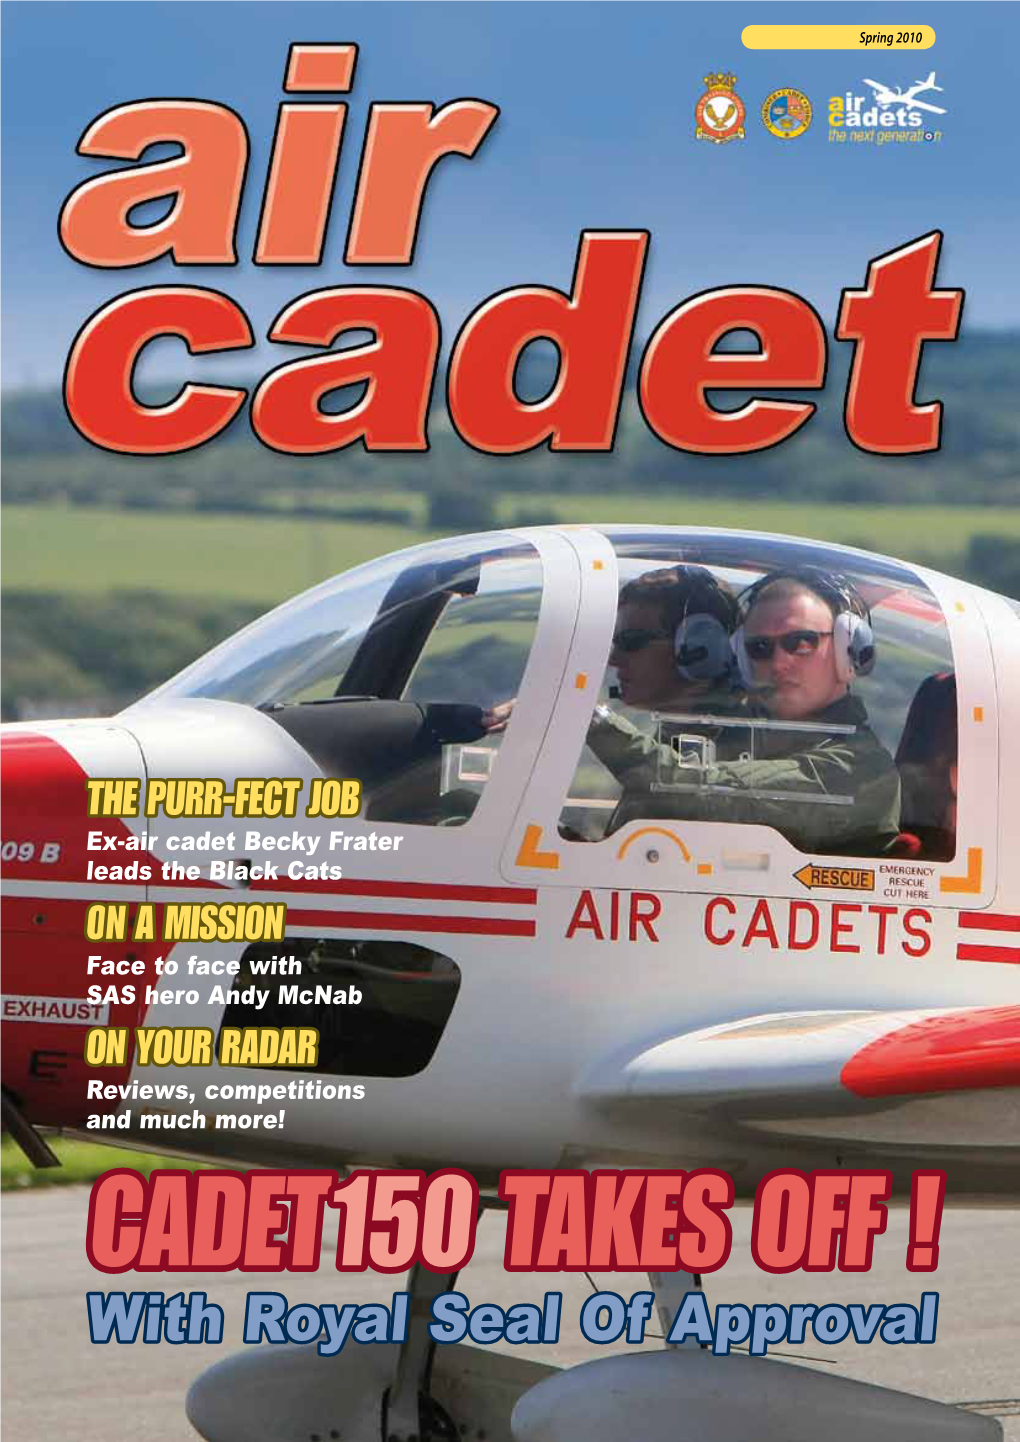 With Royal Seal of Approval 2 Air Cadet / Spring 2010 This Issue